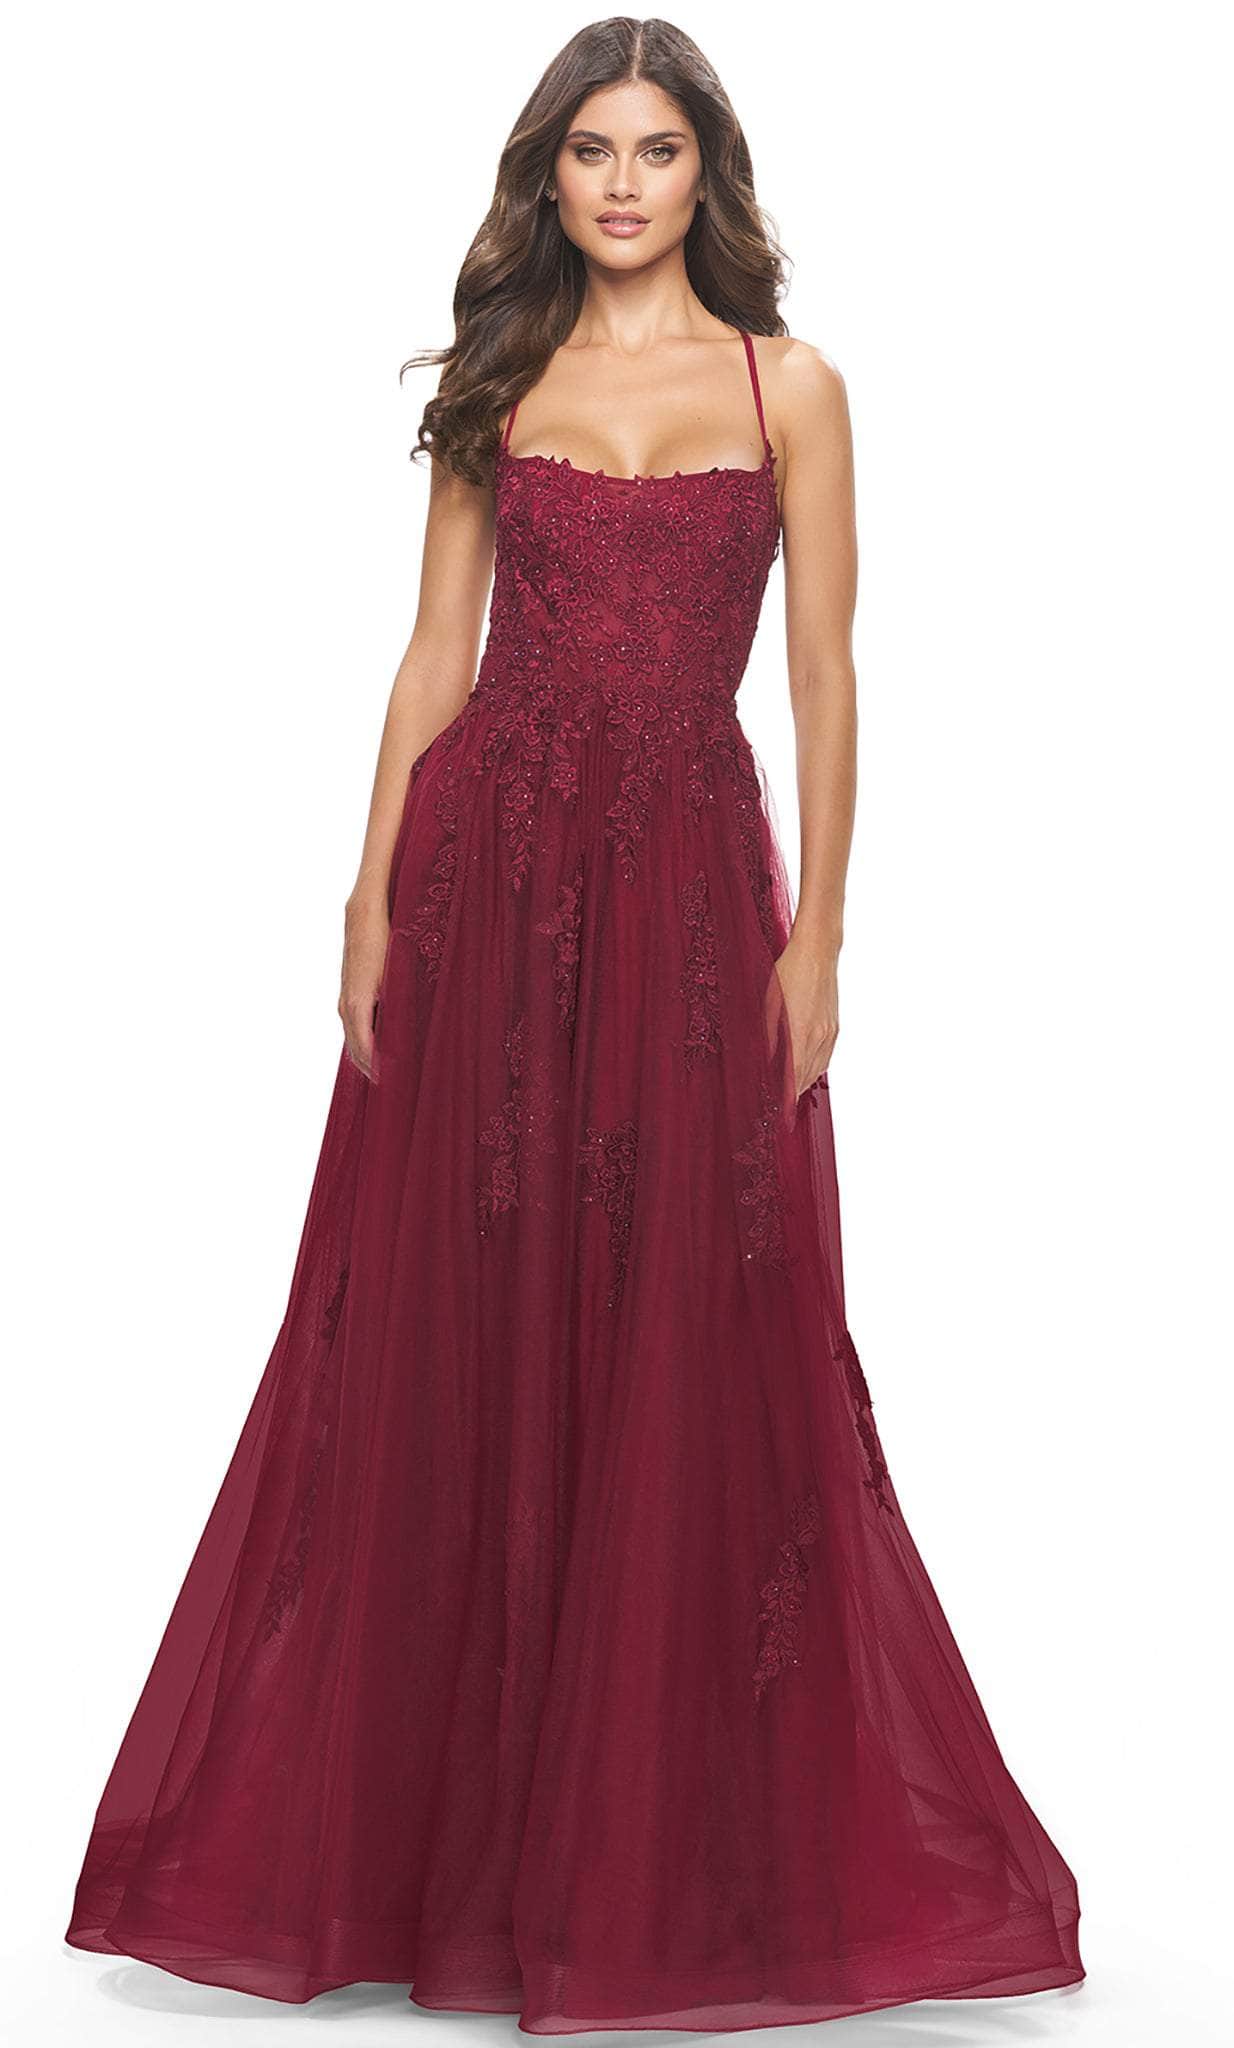 Image of La Femme 31135 - Lace Embroidered Prom Dress